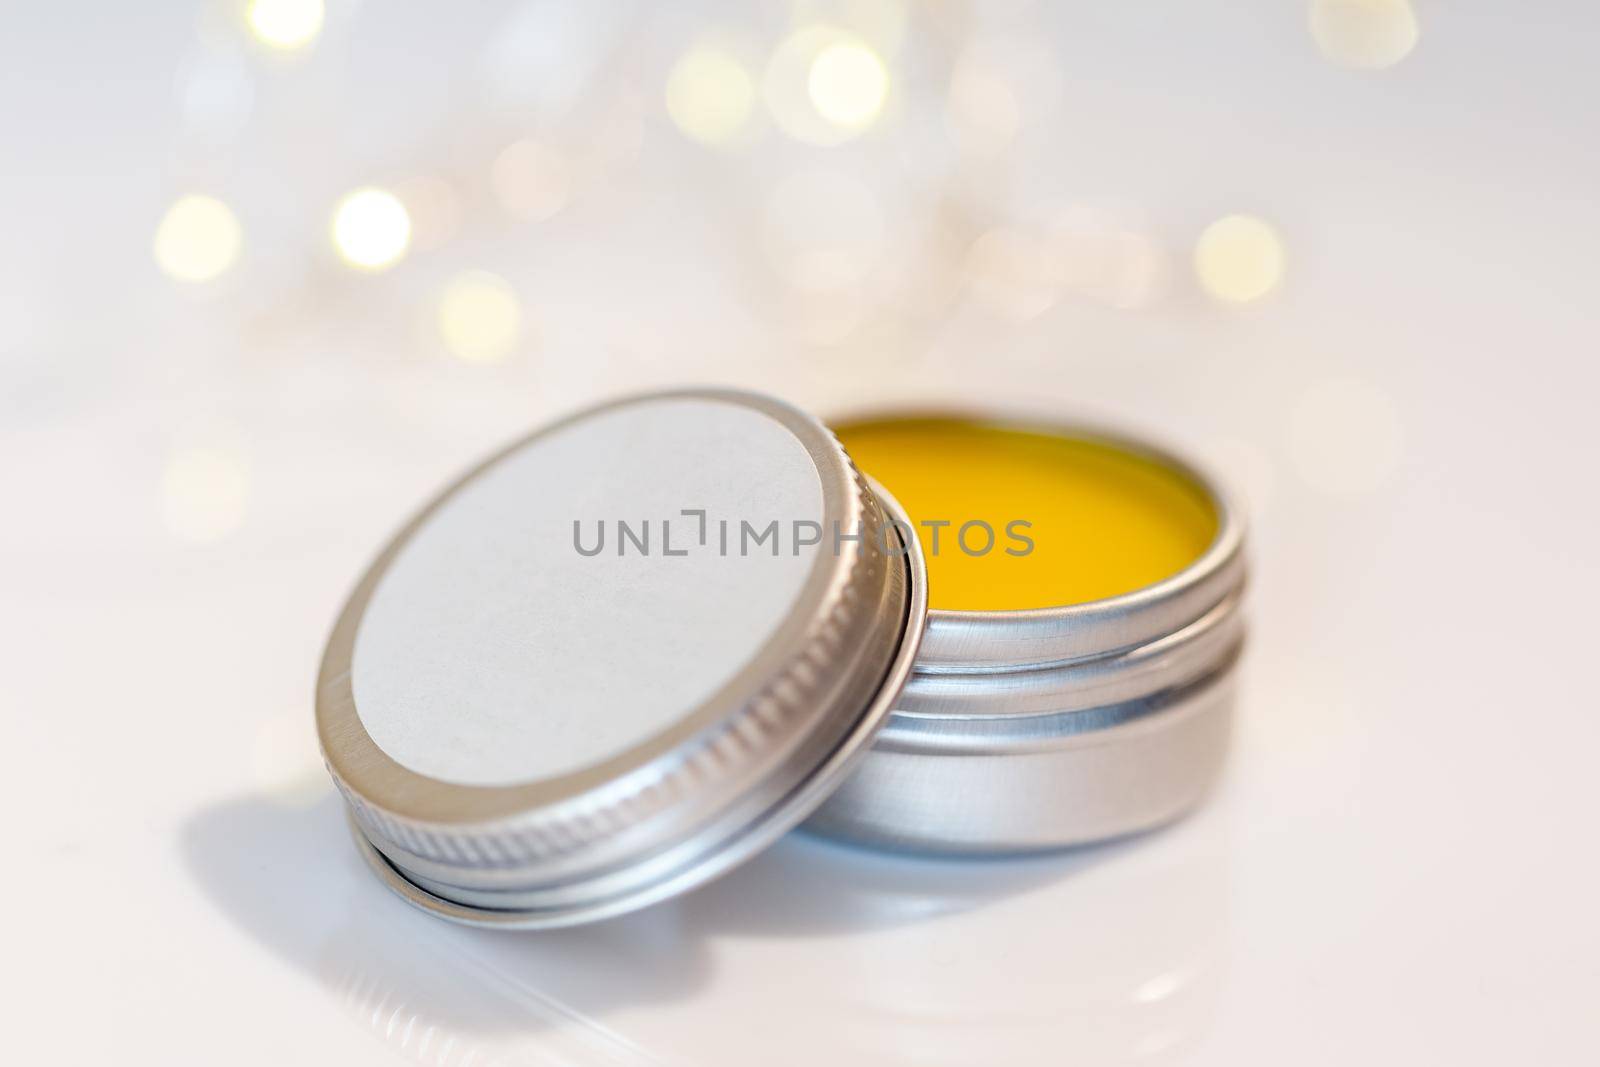 Lip balm in metal jar over sparkling light bokeh background. Empty label mock up. Natural cosmetic winter care product. Selective focus